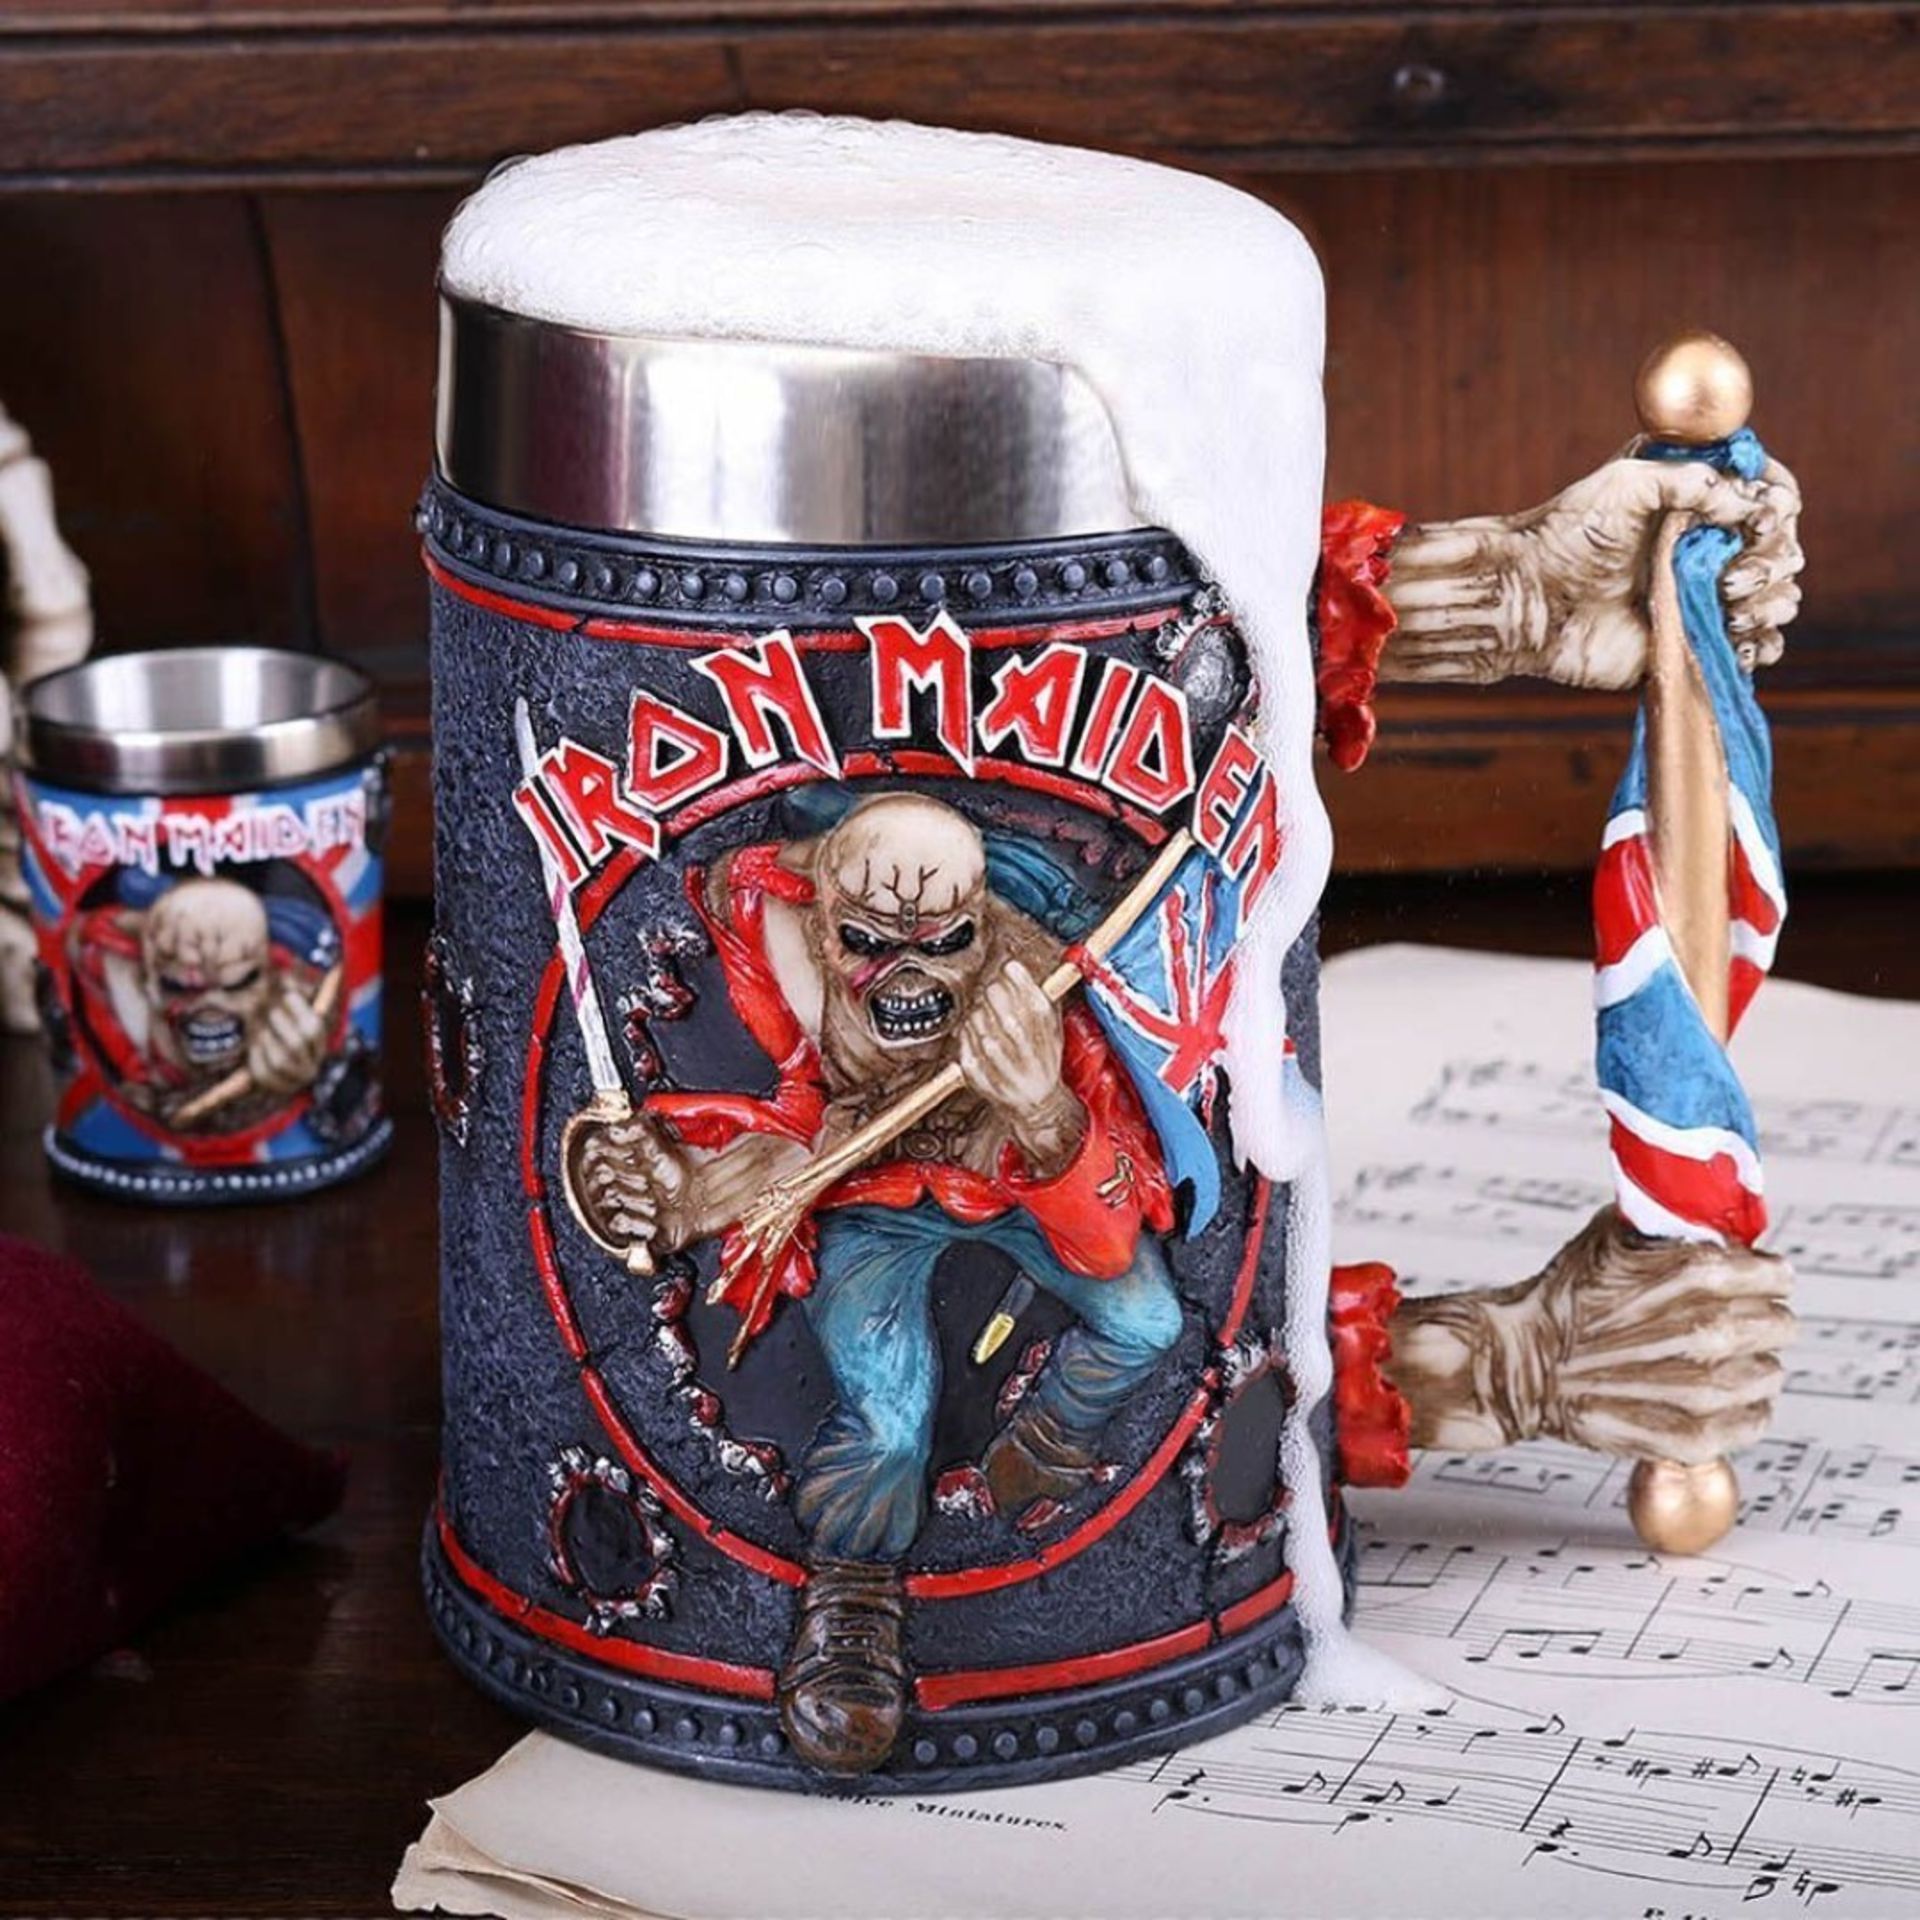 1 x Iron Maiden Officially Licensed Tankard Featuring Eddie the Trooper and Union Jack - RRP £60 - Image 11 of 11